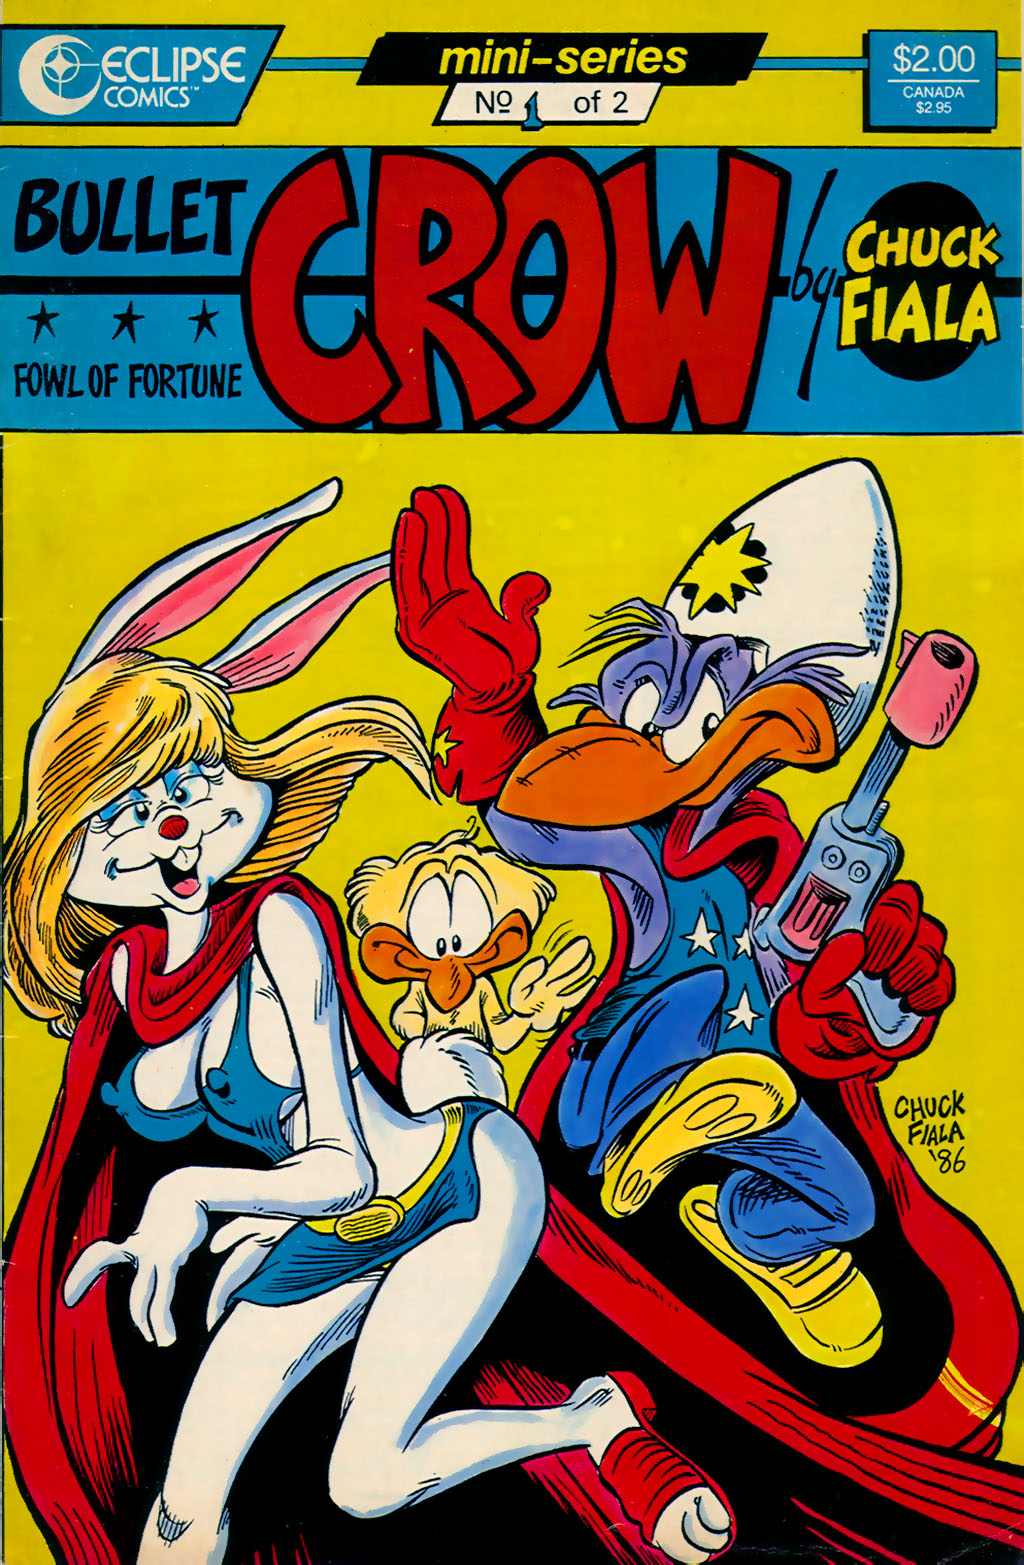 Read online Bullet Crow, Fowl of Fortune comic -  Issue #1 - 1